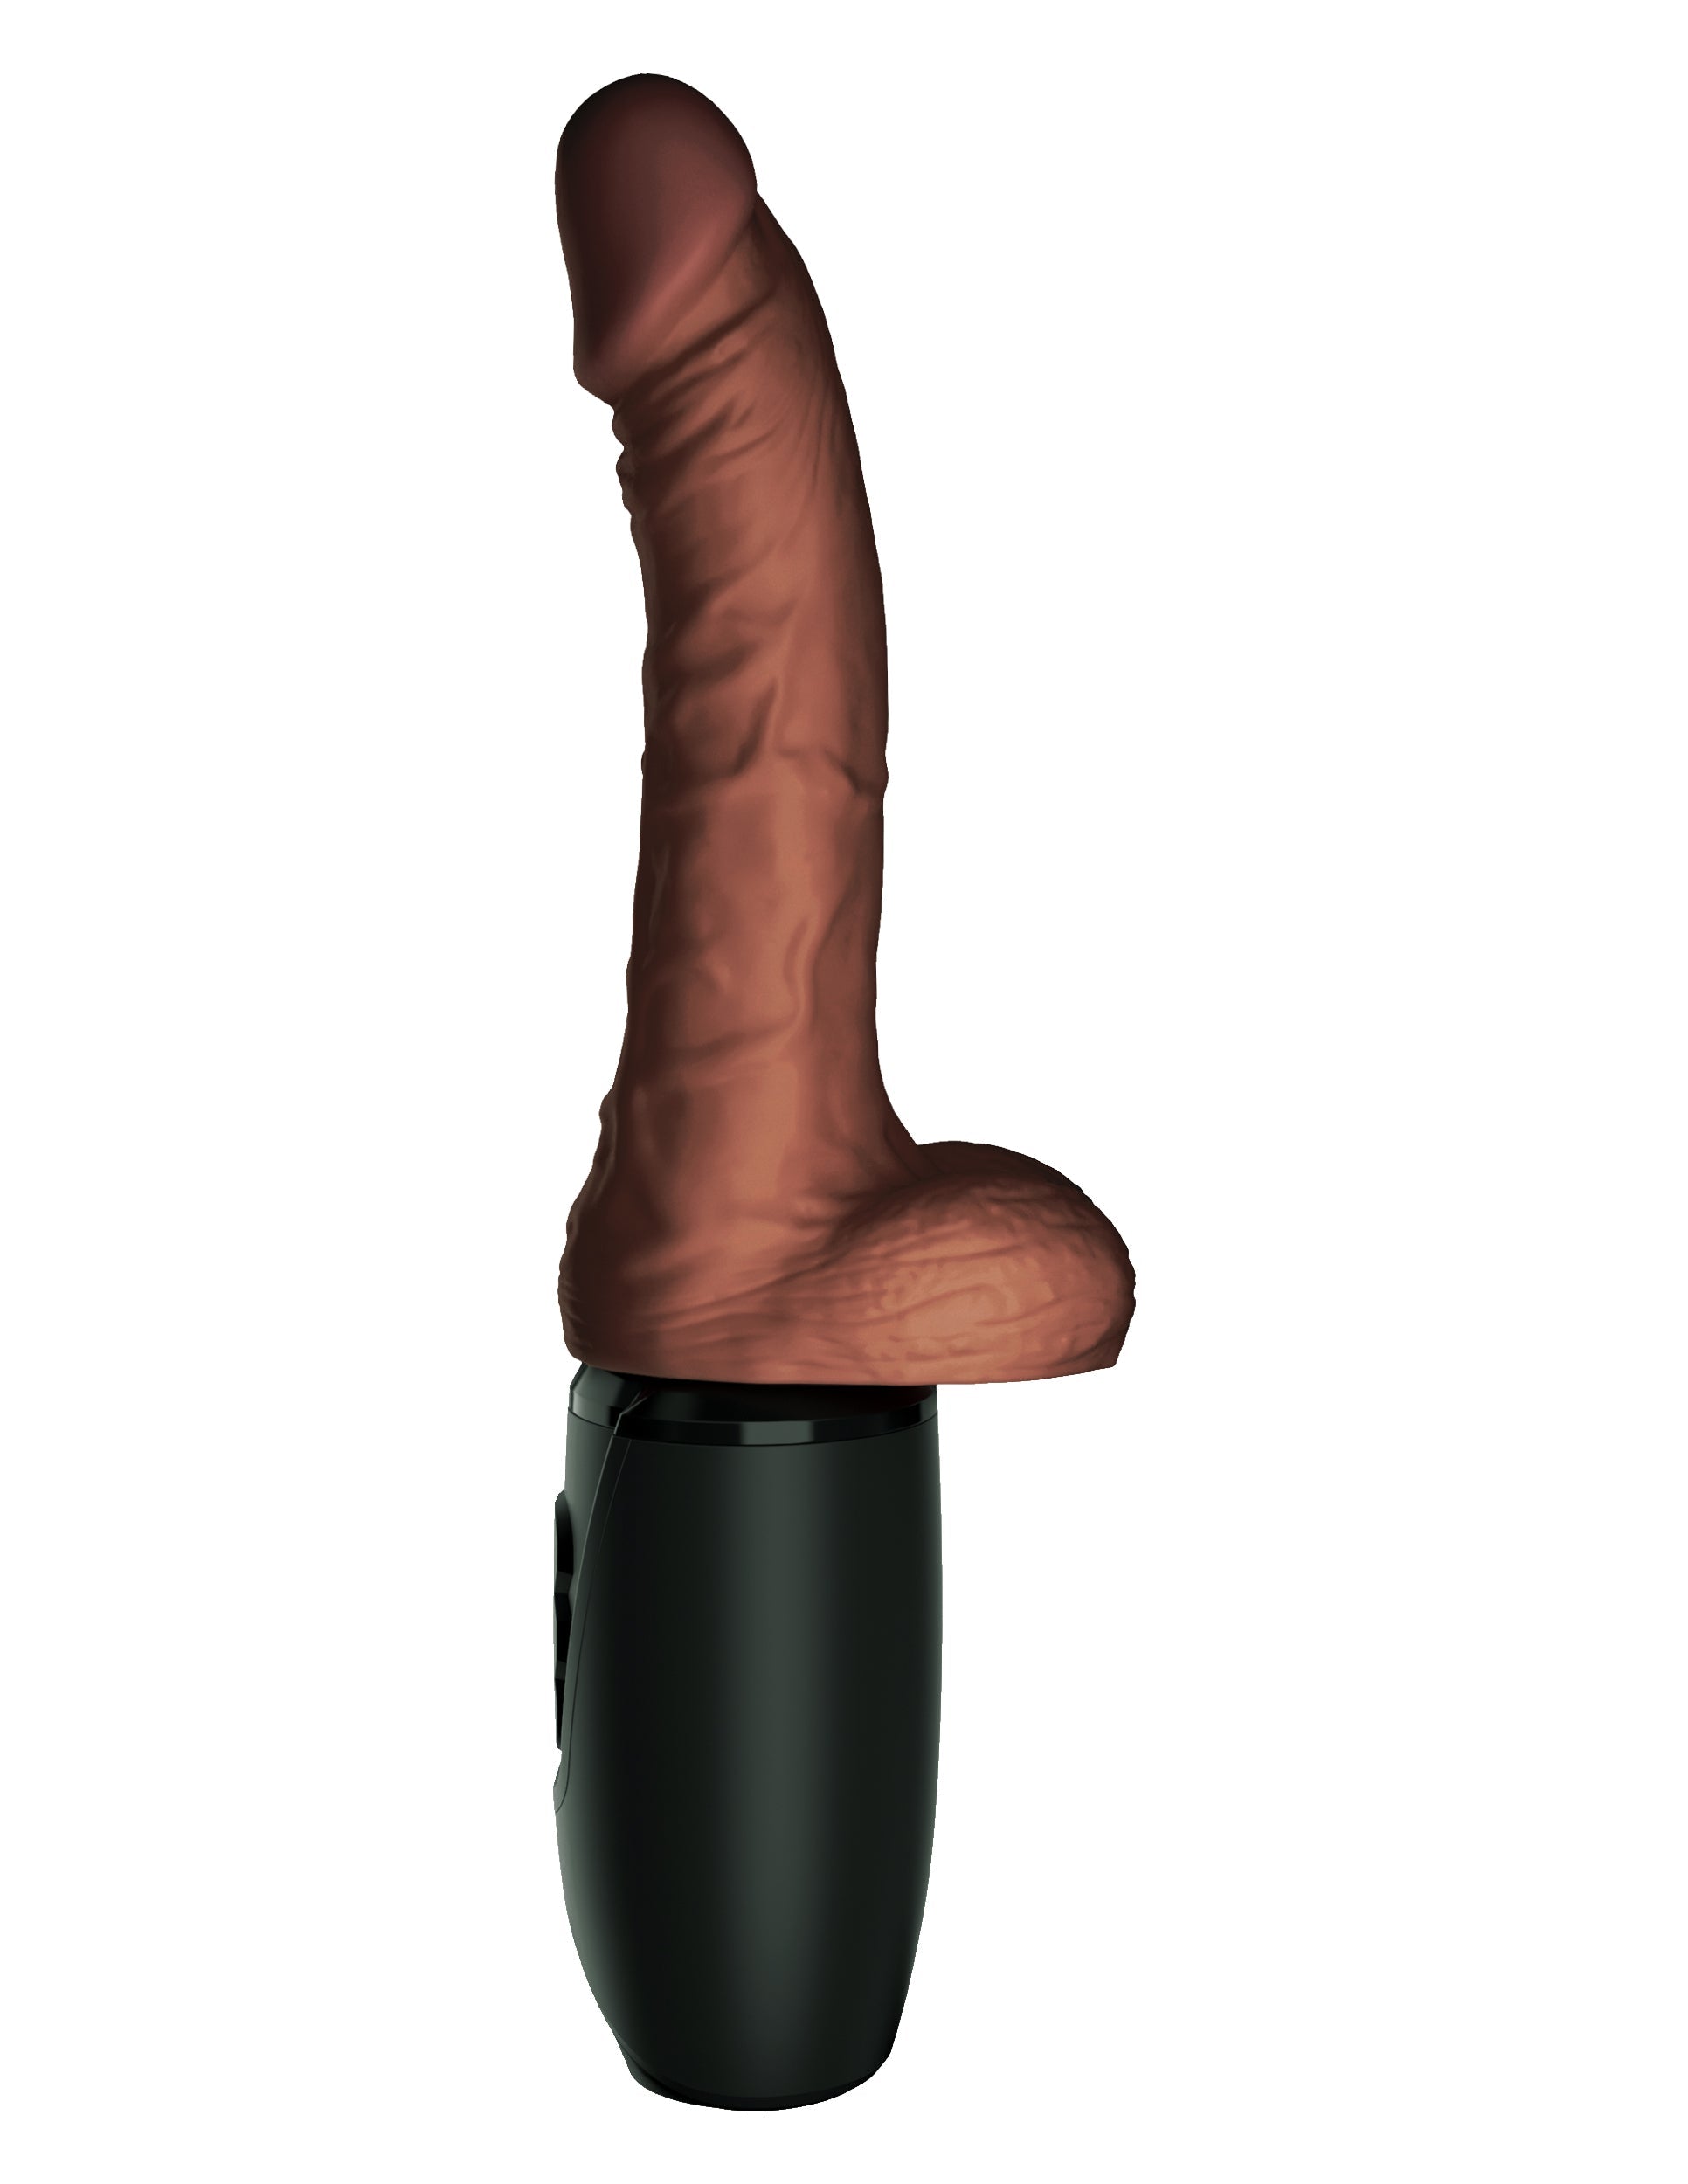 King Cock Plus Rechargeable Thrusting Dildo with Balls 7.5 Inches